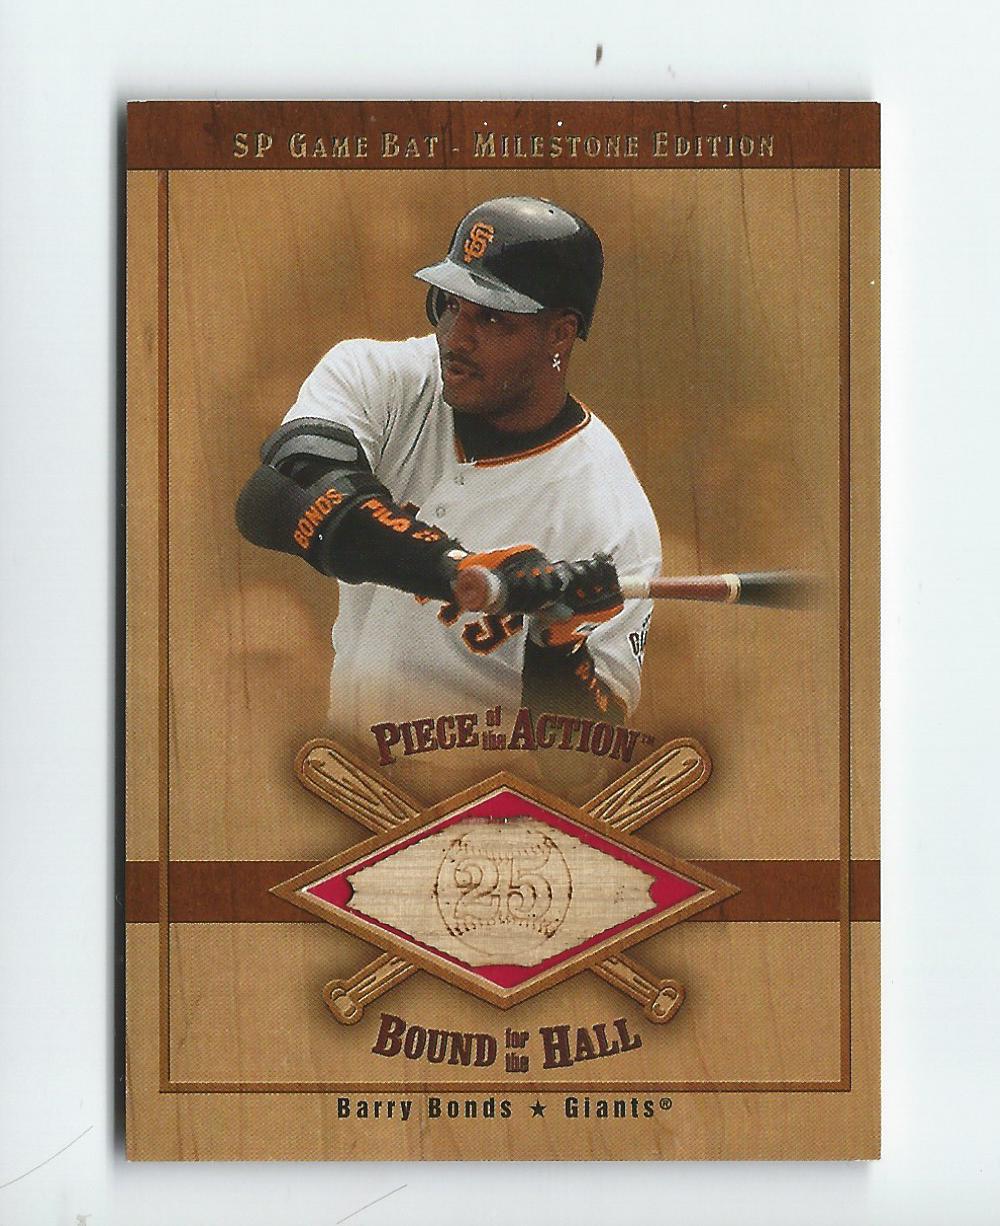 2001 SP Game Bat Milestone Piece of Action Bound for the Hall #BBB Barry Bonds